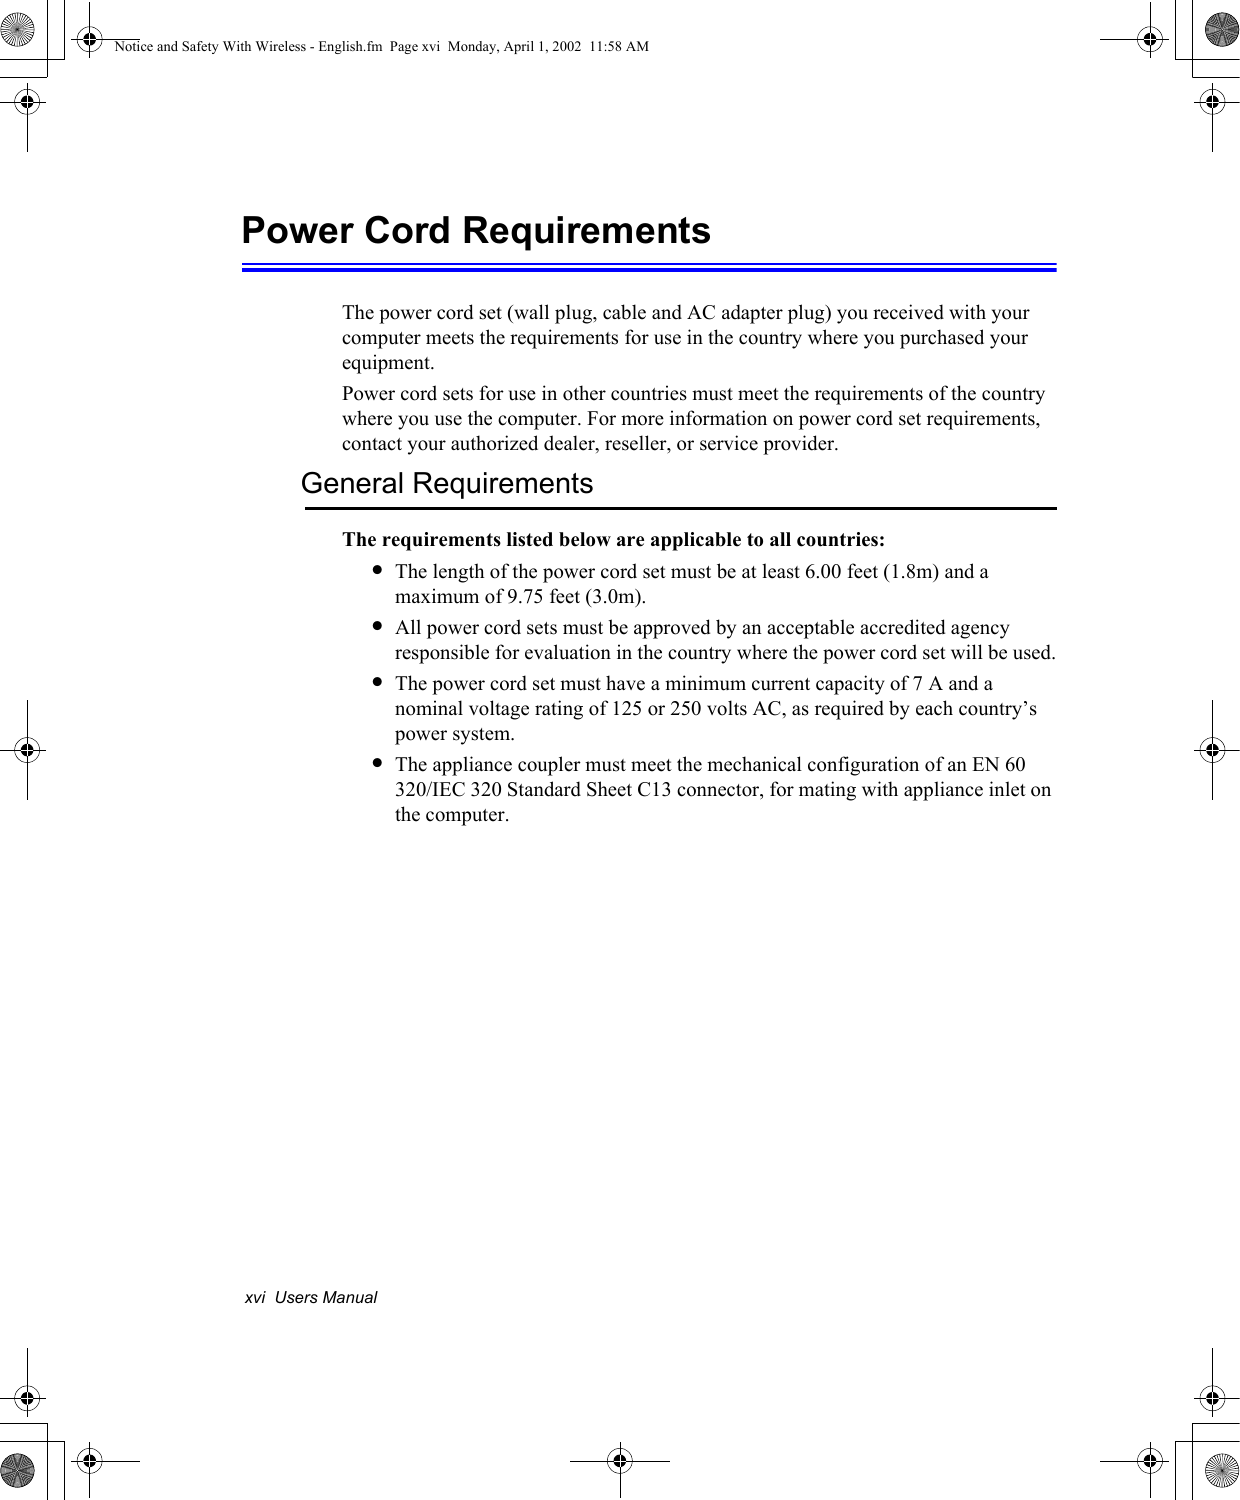 xvi  Users ManualPower Cord RequirementsThe power cord set (wall plug, cable and AC adapter plug) you received with your computer meets the requirements for use in the country where you purchased your equipment.Power cord sets for use in other countries must meet the requirements of the country where you use the computer. For more information on power cord set requirements, contact your authorized dealer, reseller, or service provider.General RequirementsThe requirements listed below are applicable to all countries:•The length of the power cord set must be at least 6.00 feet (1.8m) and a maximum of 9.75 feet (3.0m).•All power cord sets must be approved by an acceptable accredited agency responsible for evaluation in the country where the power cord set will be used.•The power cord set must have a minimum current capacity of 7 A and a nominal voltage rating of 125 or 250 volts AC, as required by each country’s power system.•The appliance coupler must meet the mechanical configuration of an EN 60 320/IEC 320 Standard Sheet C13 connector, for mating with appliance inlet on the computer.Notice and Safety With Wireless - English.fm  Page xvi  Monday, April 1, 2002  11:58 AM